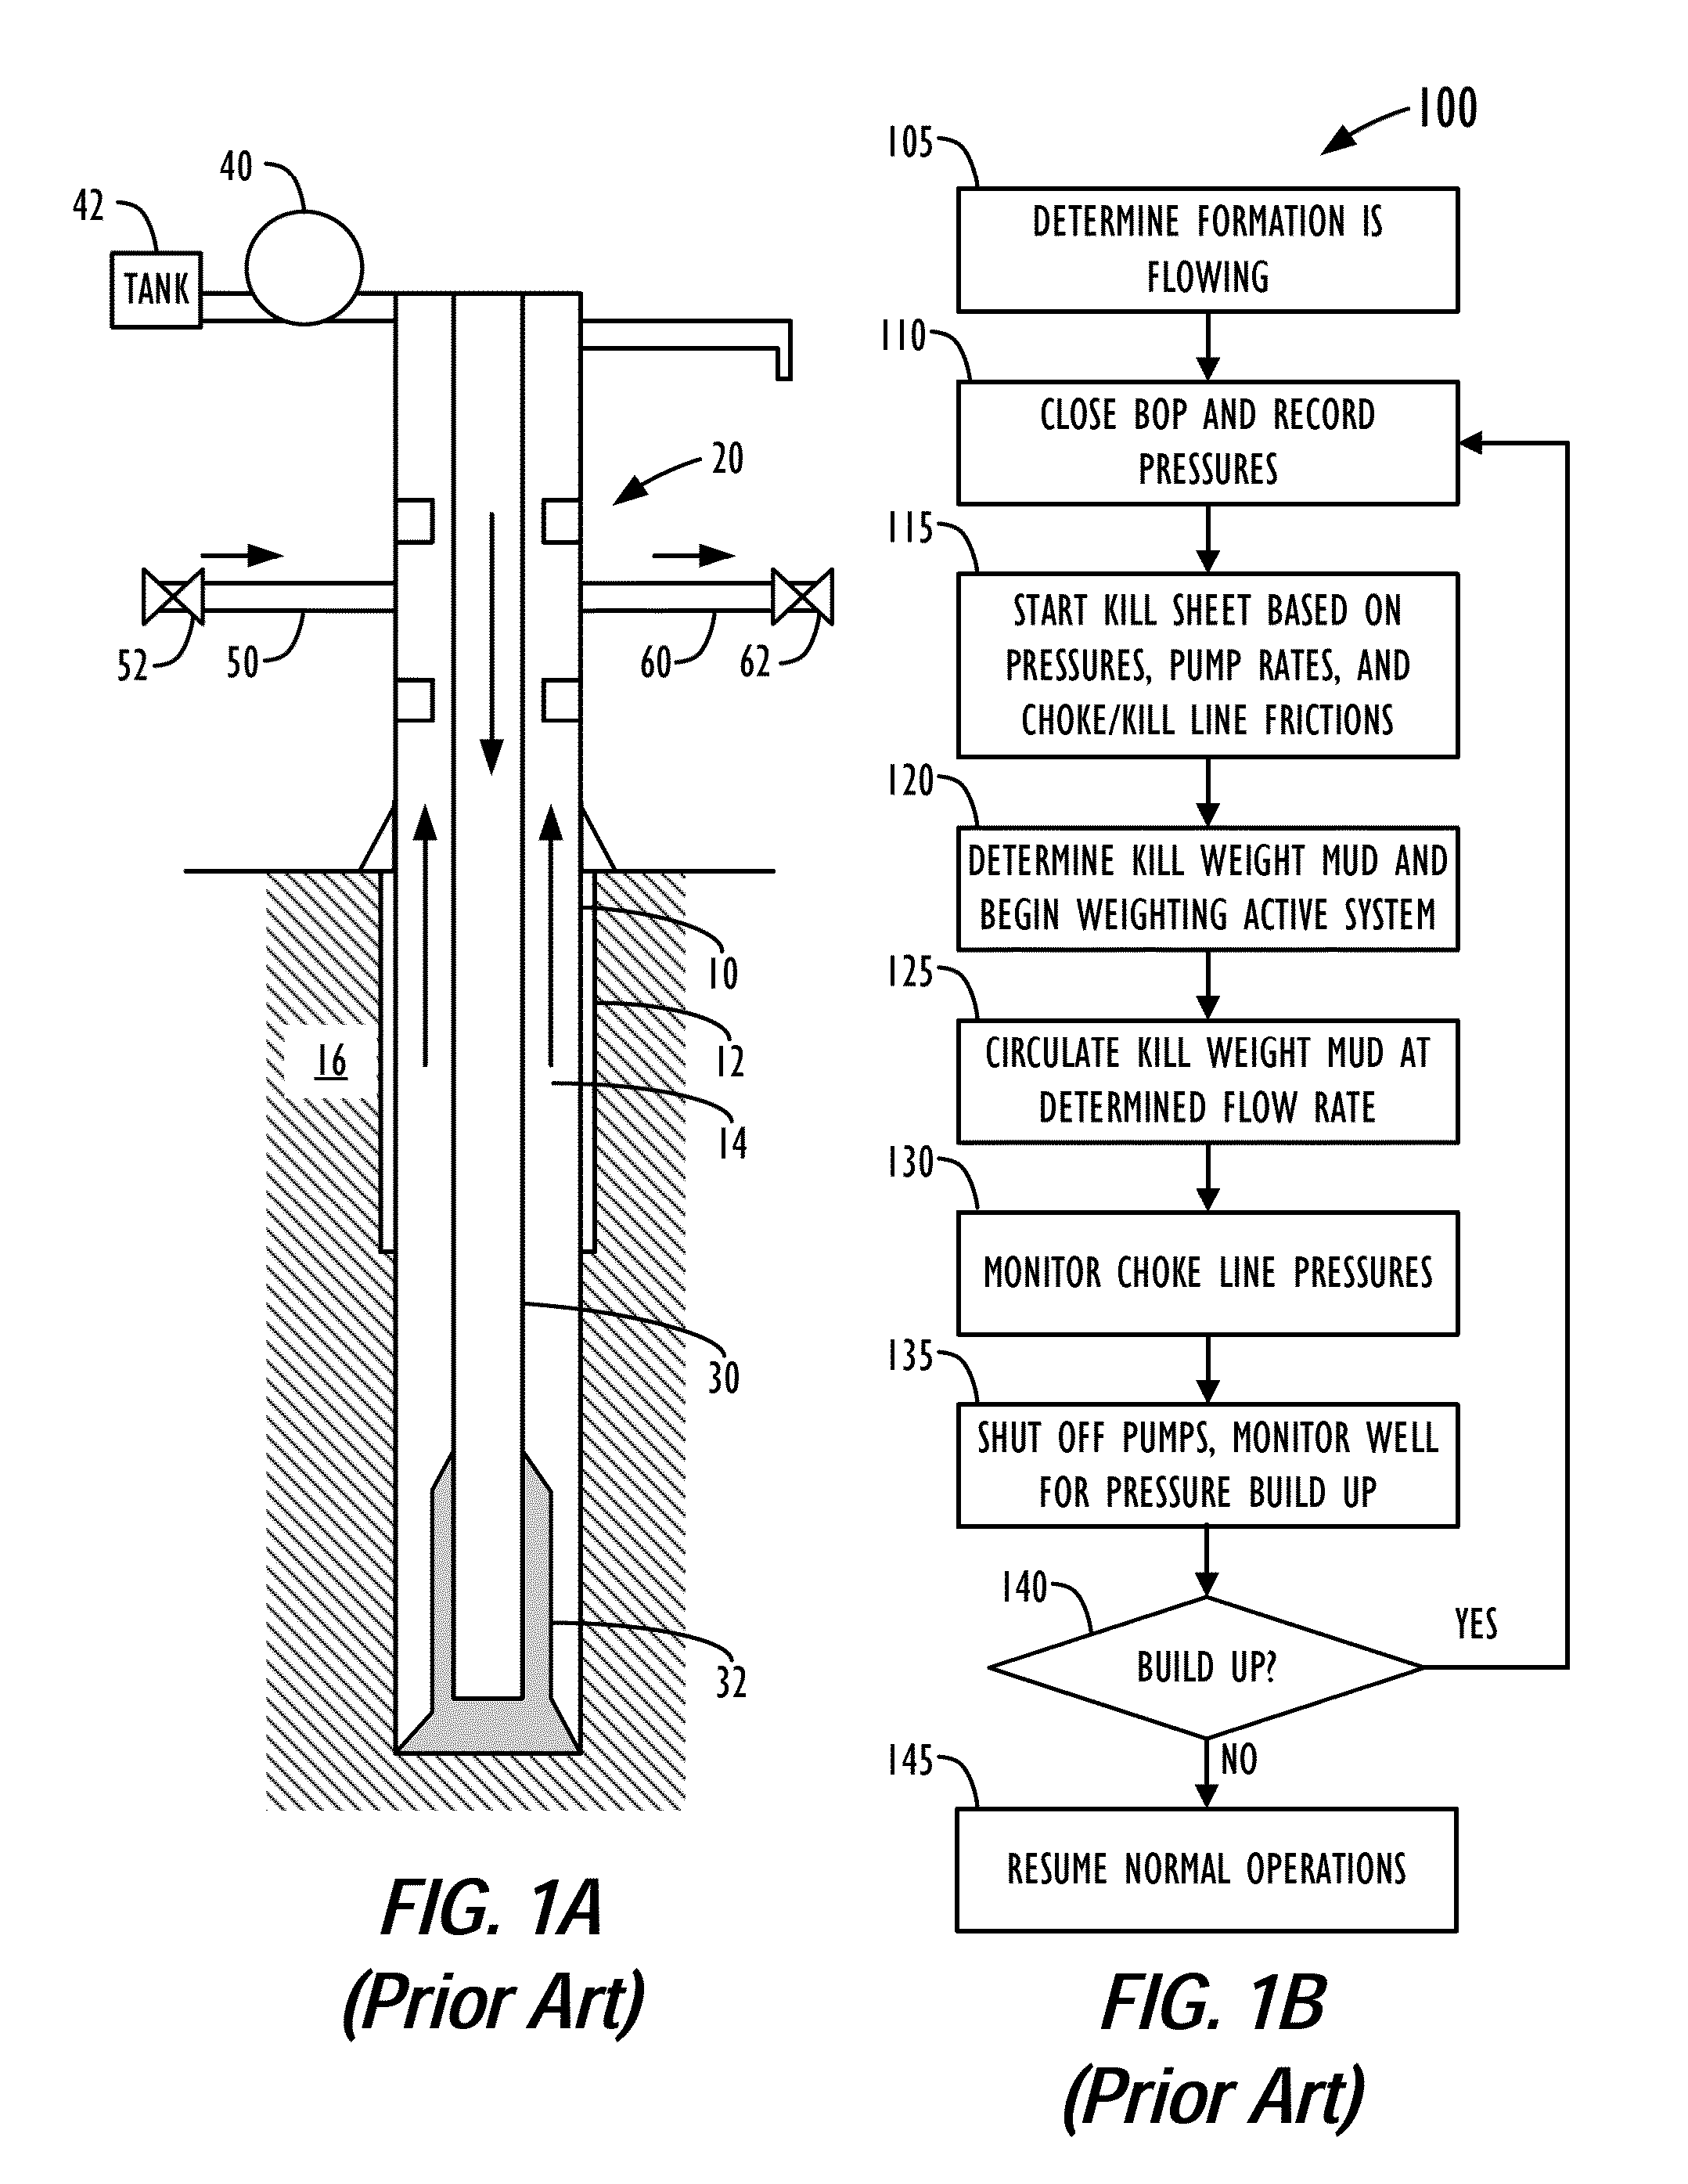 System and method for obtaining and using downhole data during well control operations